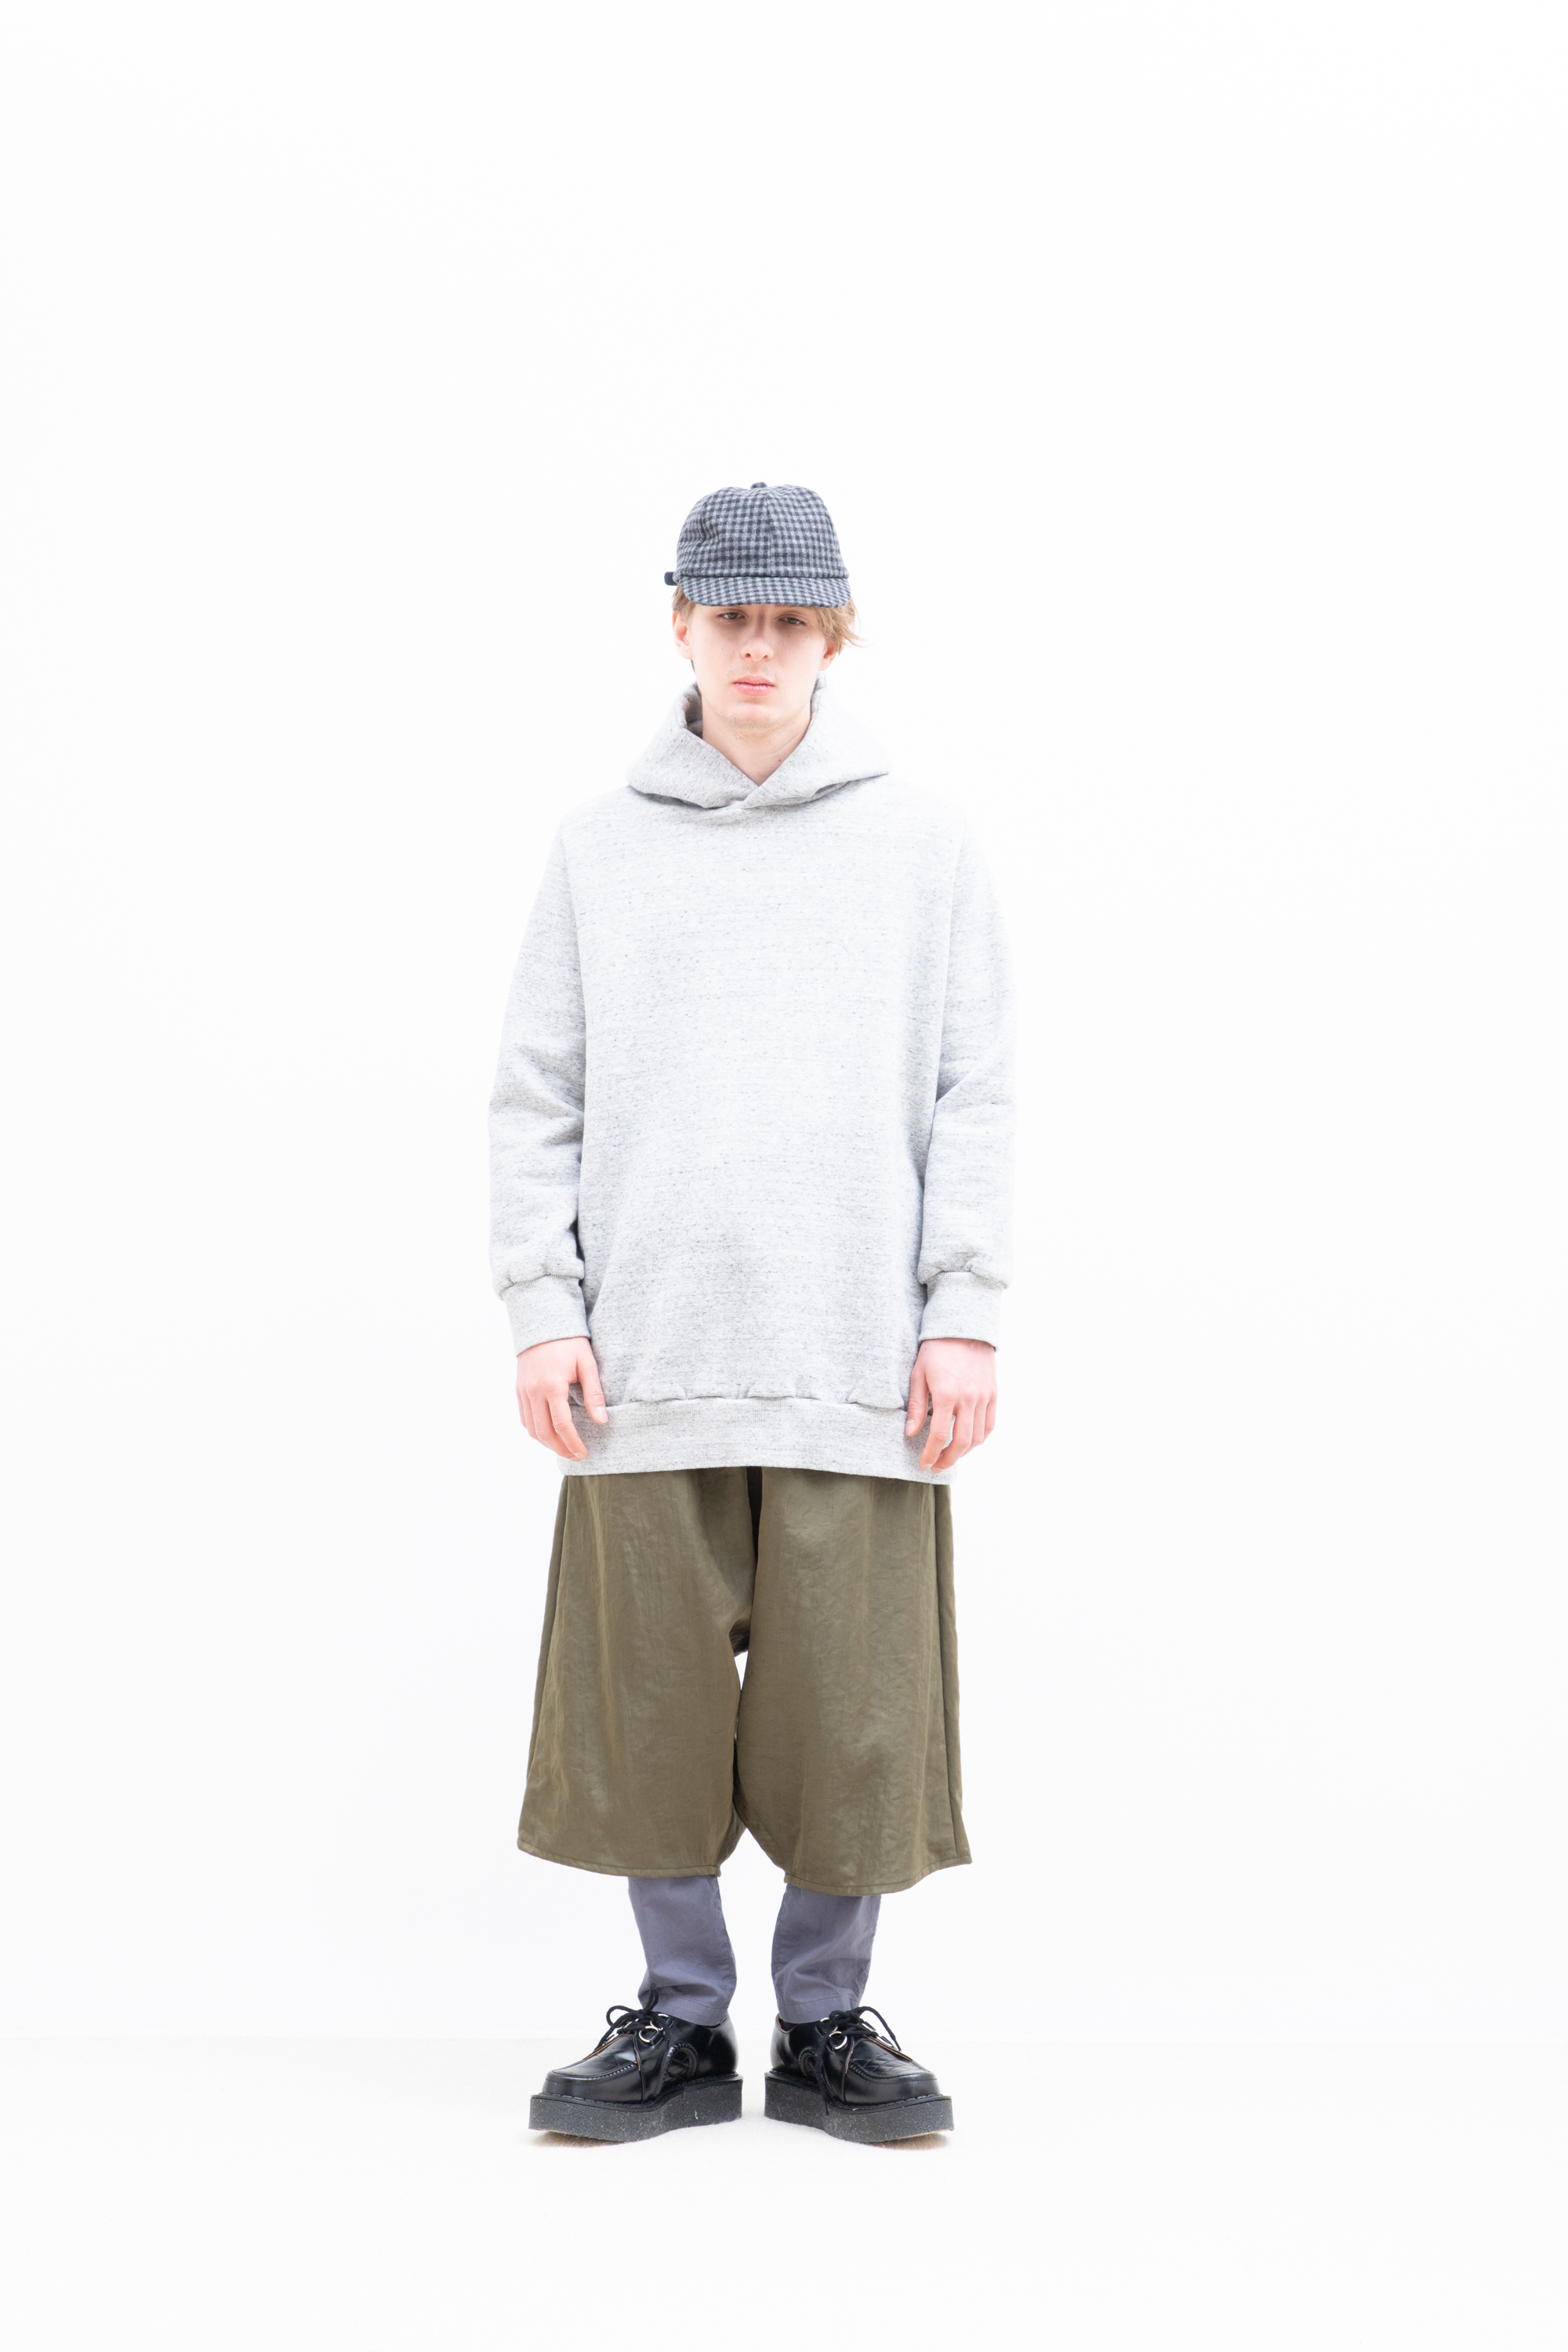 No. 029 | 2019 AW MENS | LOOK | FIRMUM